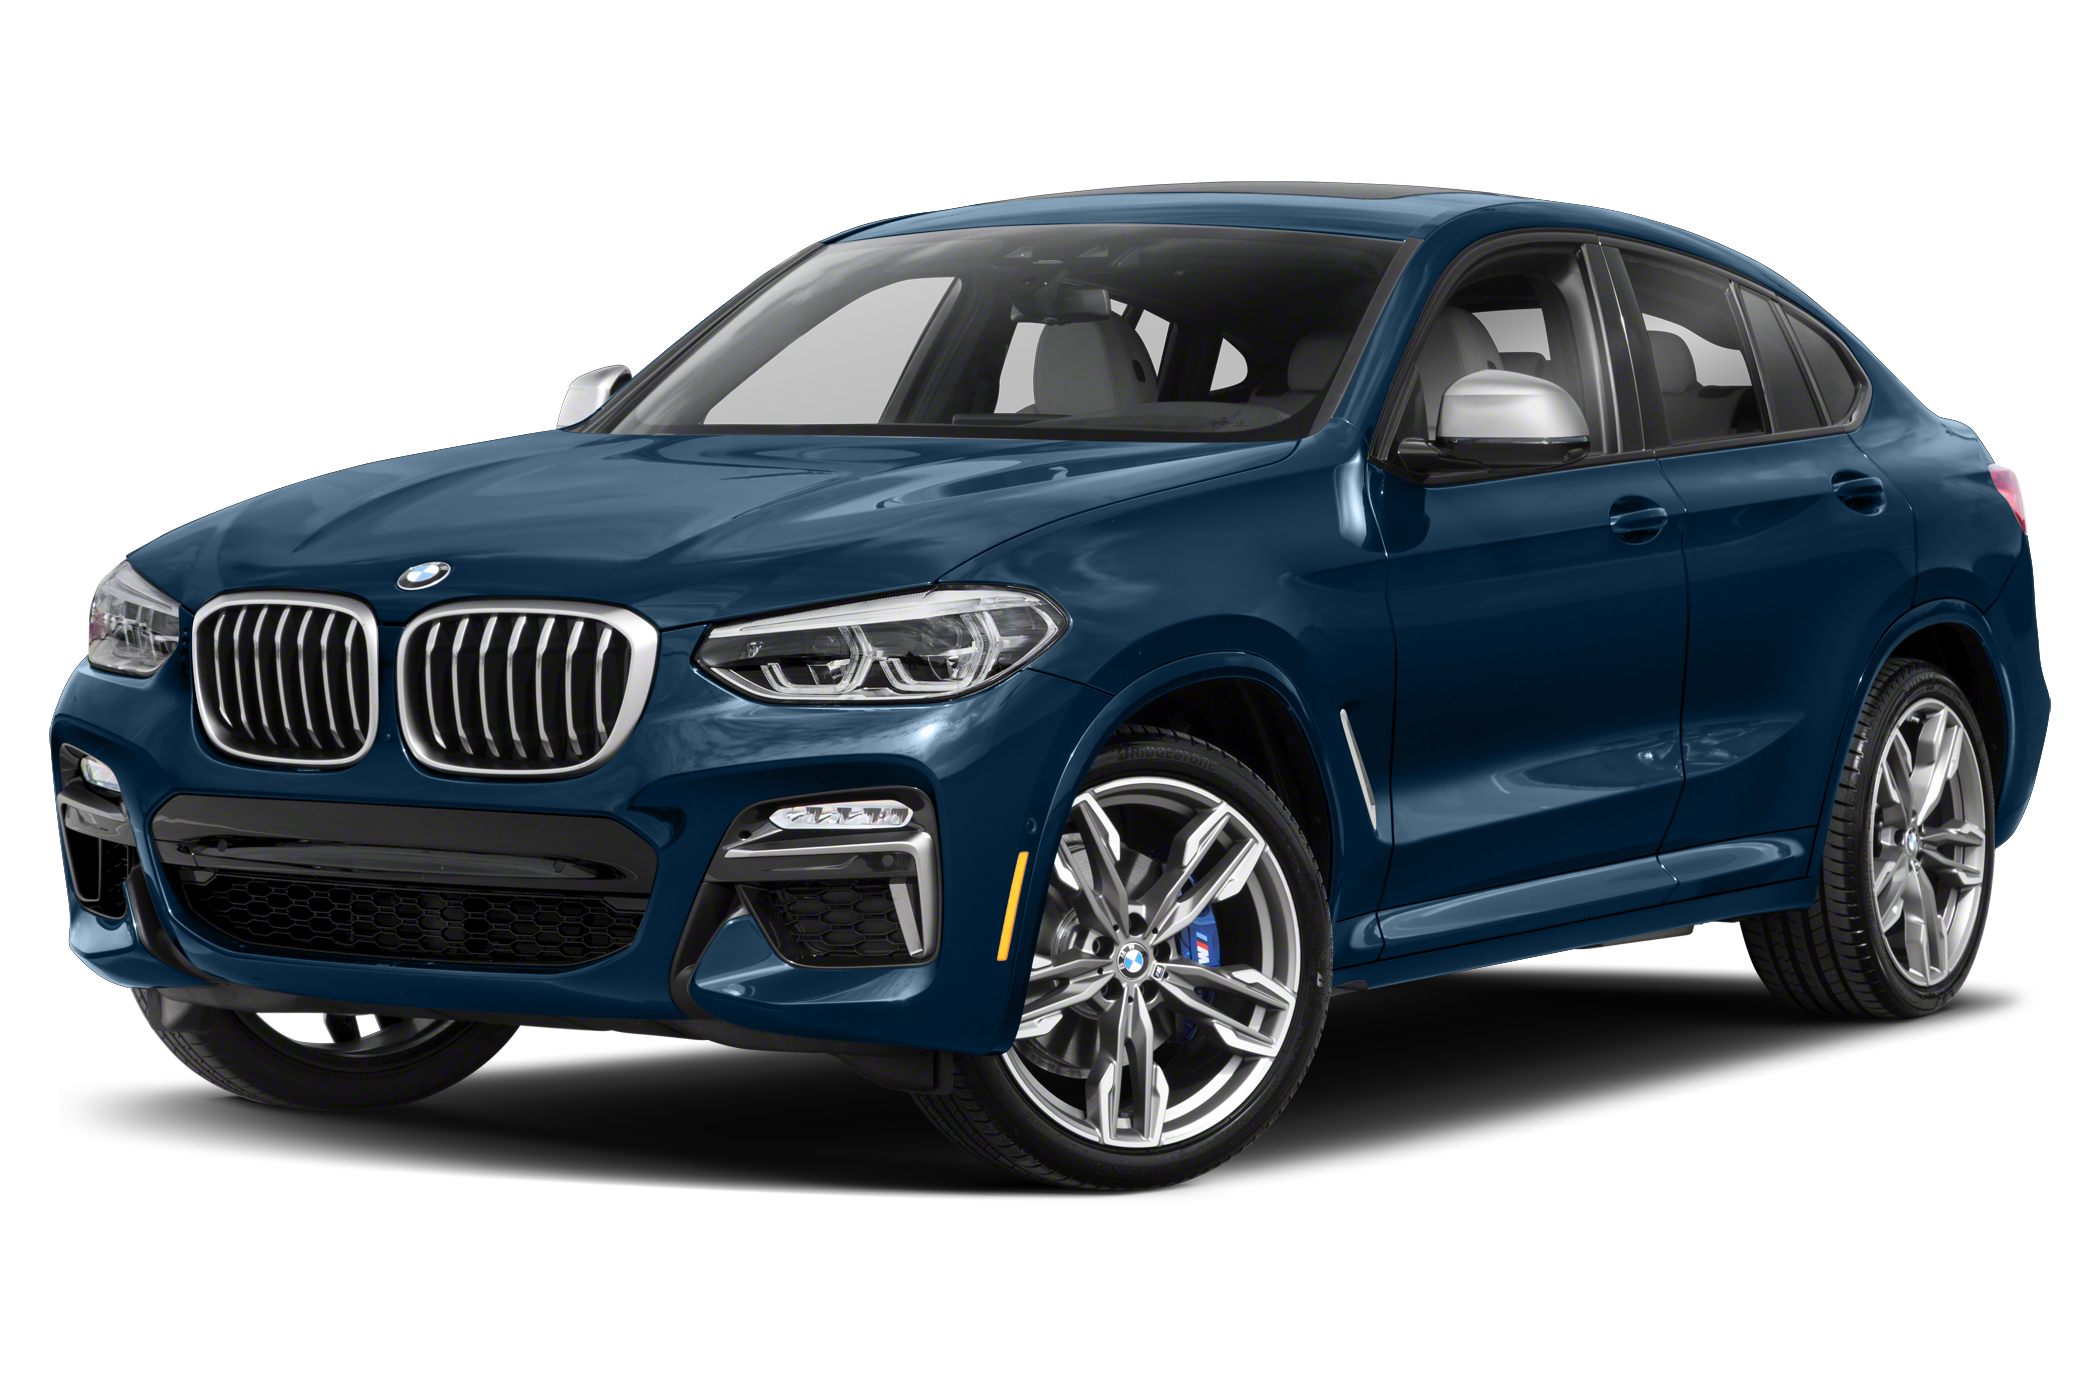 2019 Bmw X4 M40i 4dr All Wheel Drive Sports Activity Coupe Pictures